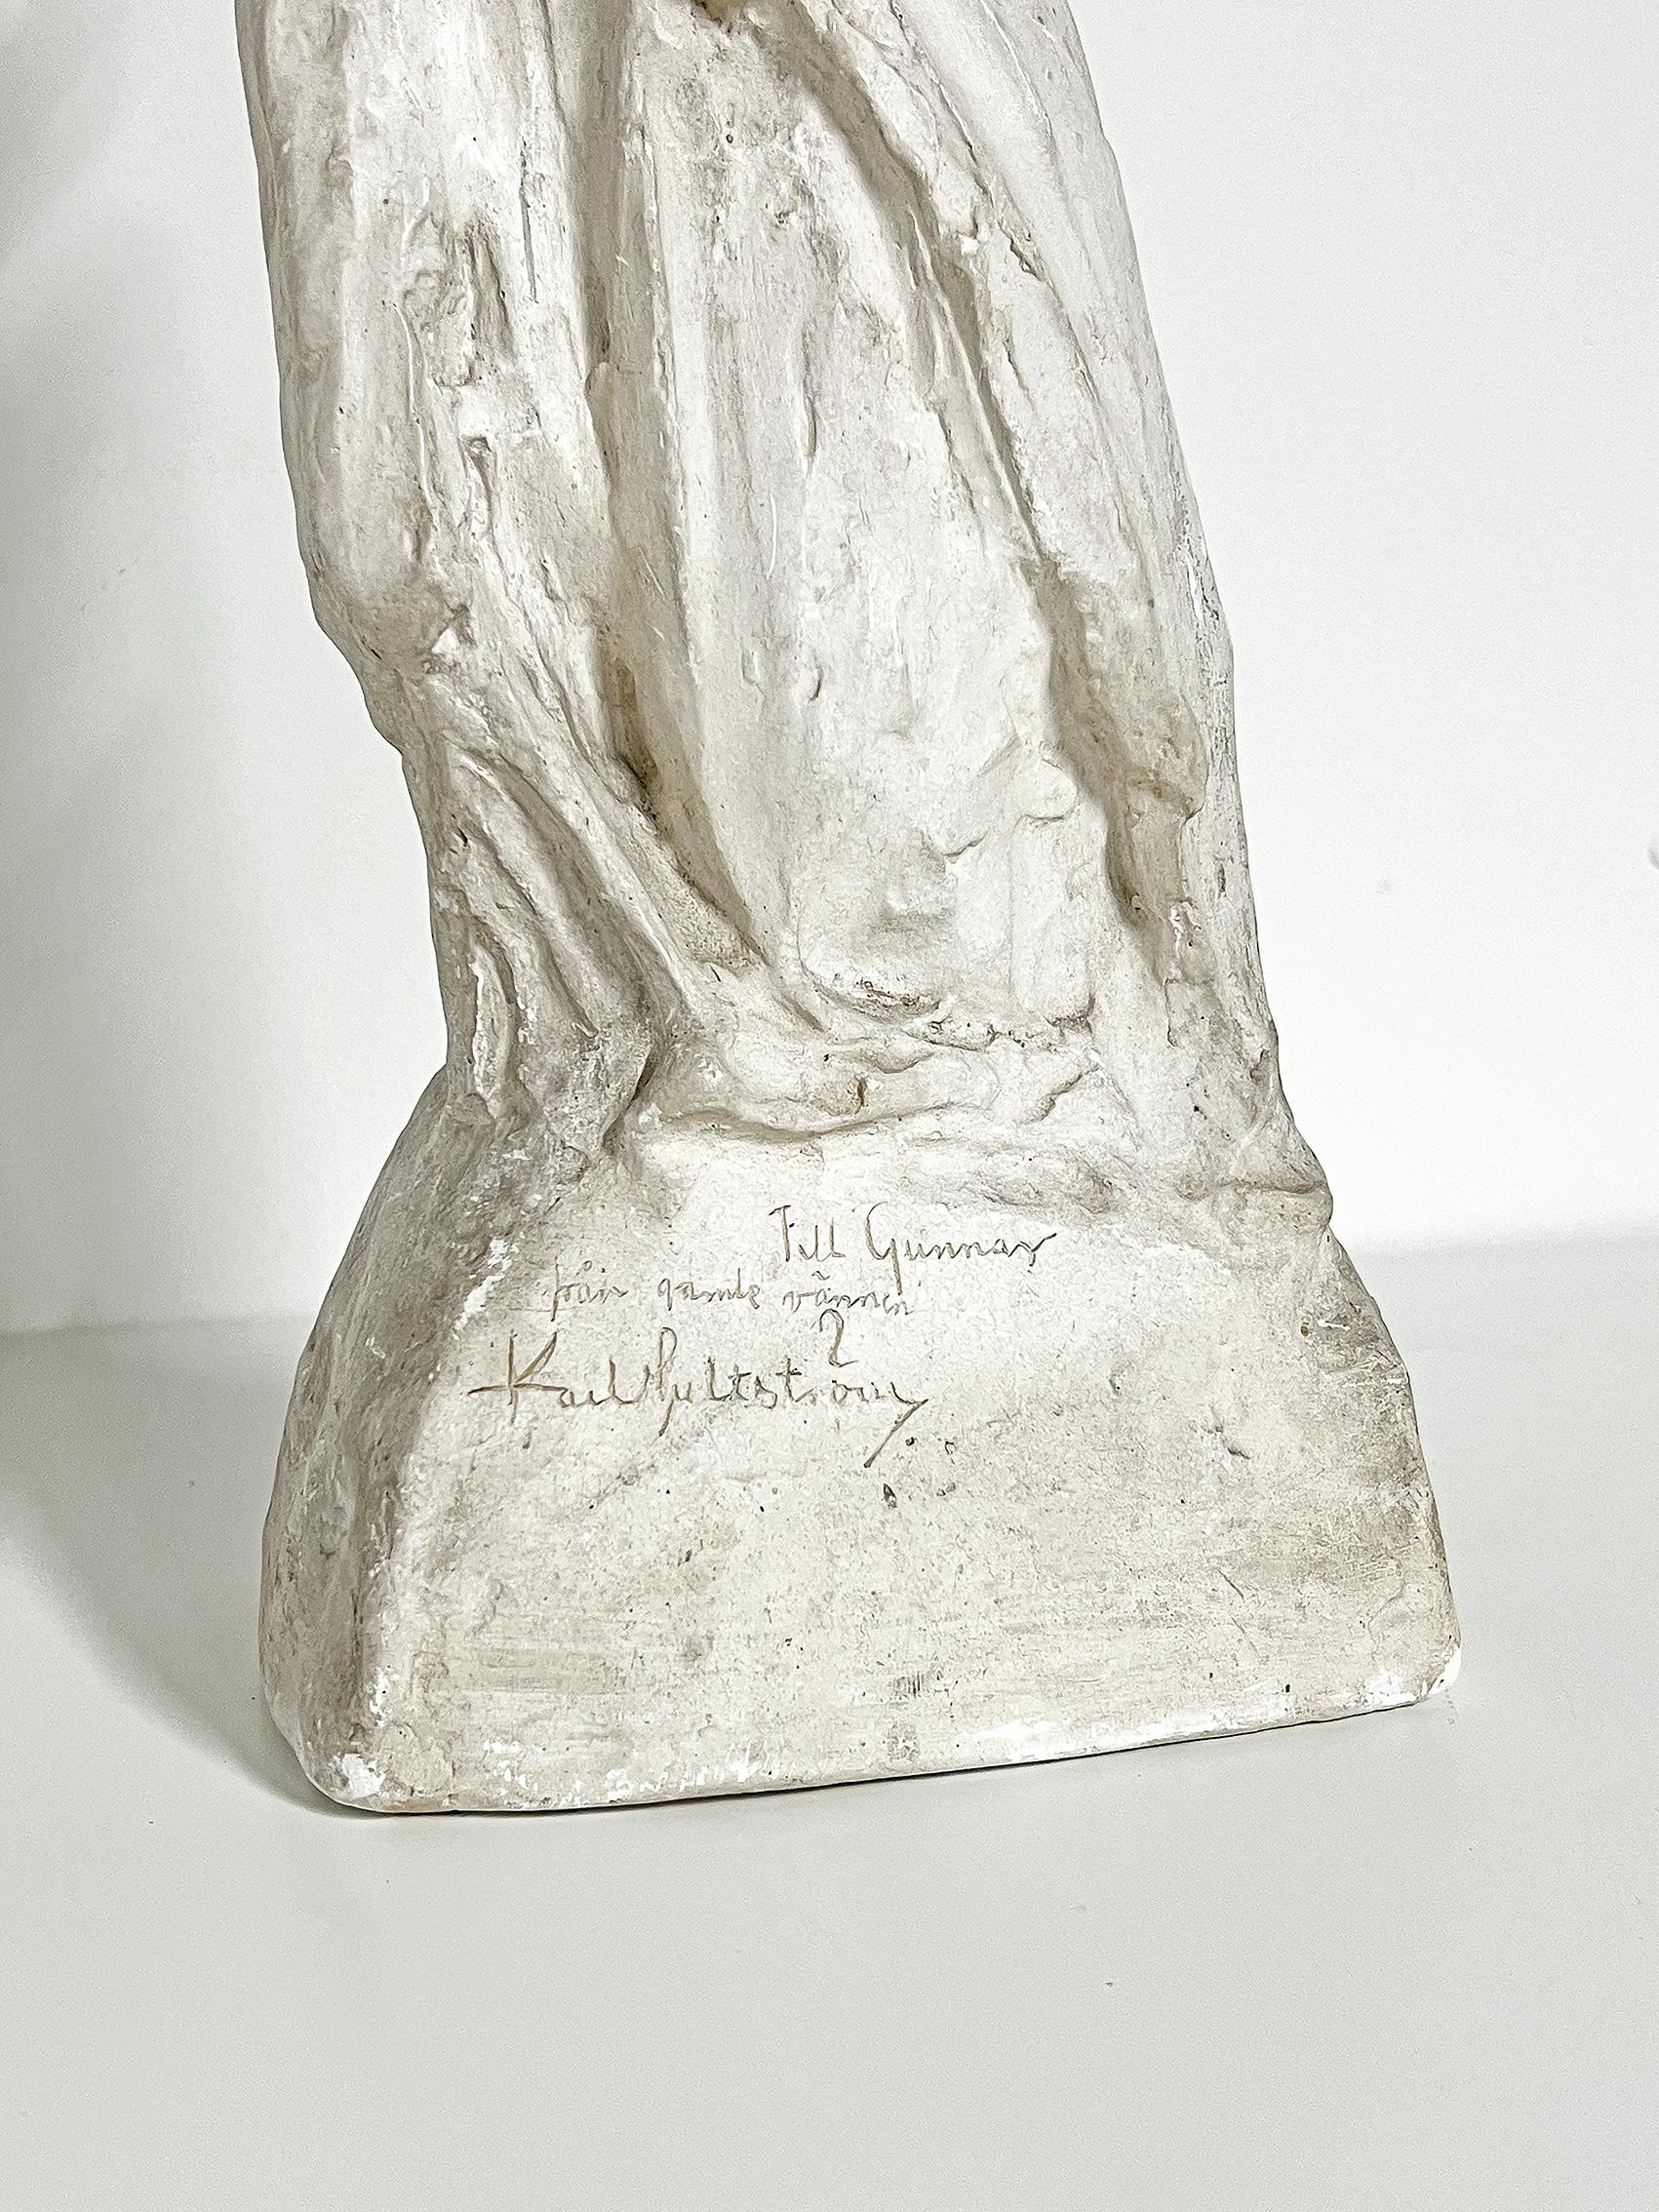 Plaster Beautiful Sculpture by Karl Hultström, Sweden, Early 19th Century For Sale